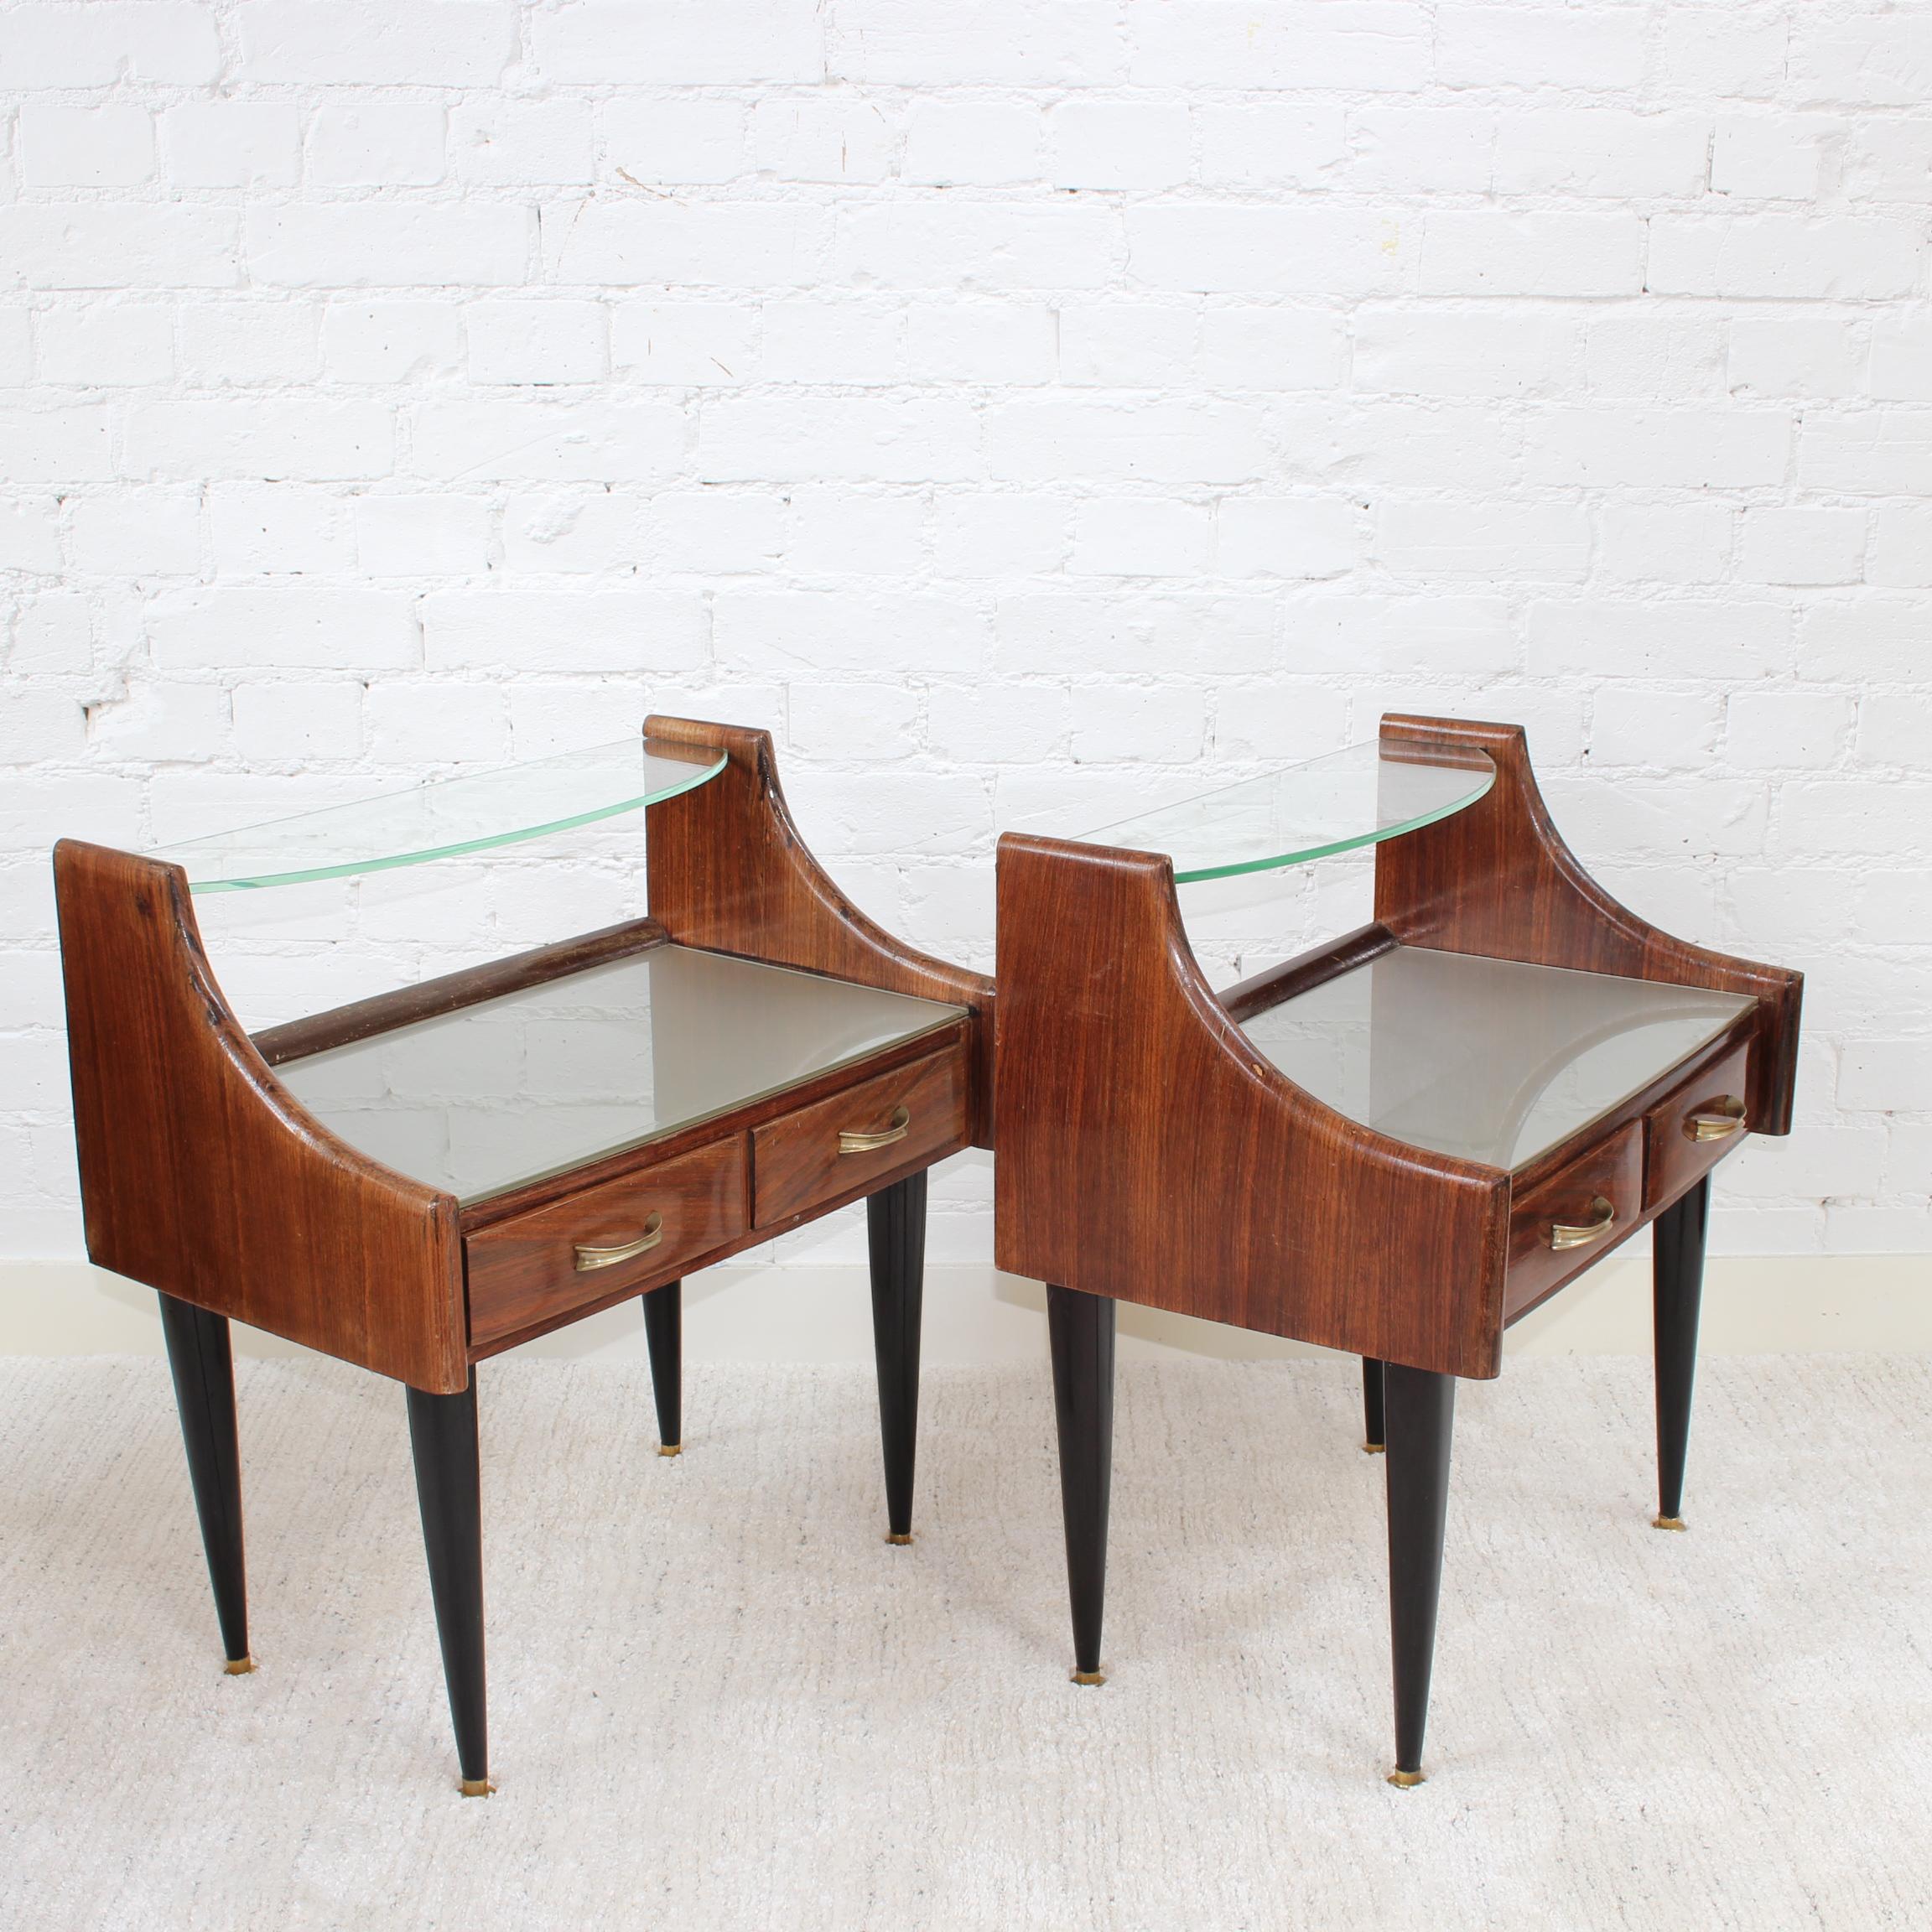 Mid-Century Modern Pair of Vintage Italian Bedside Tables / Night Stands (circa 1950s)